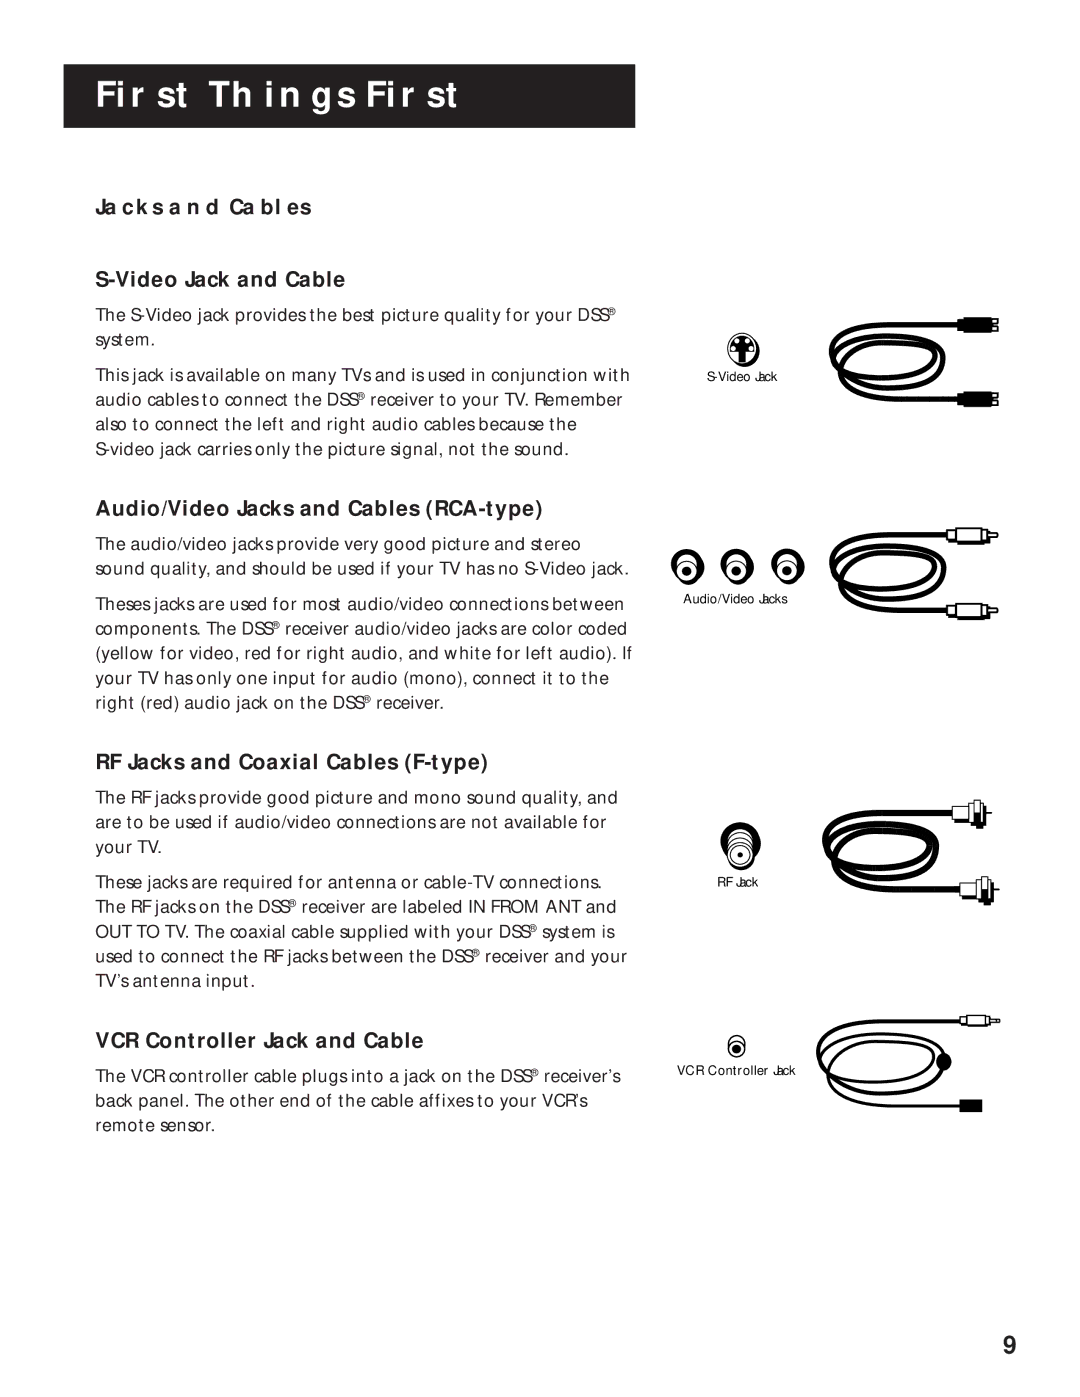 RCA DRD202RA manual Video Jack and Cable, Audio/Video Jacks and Cables RCA-type, RF Jacks and Coaxial Cables F-type 